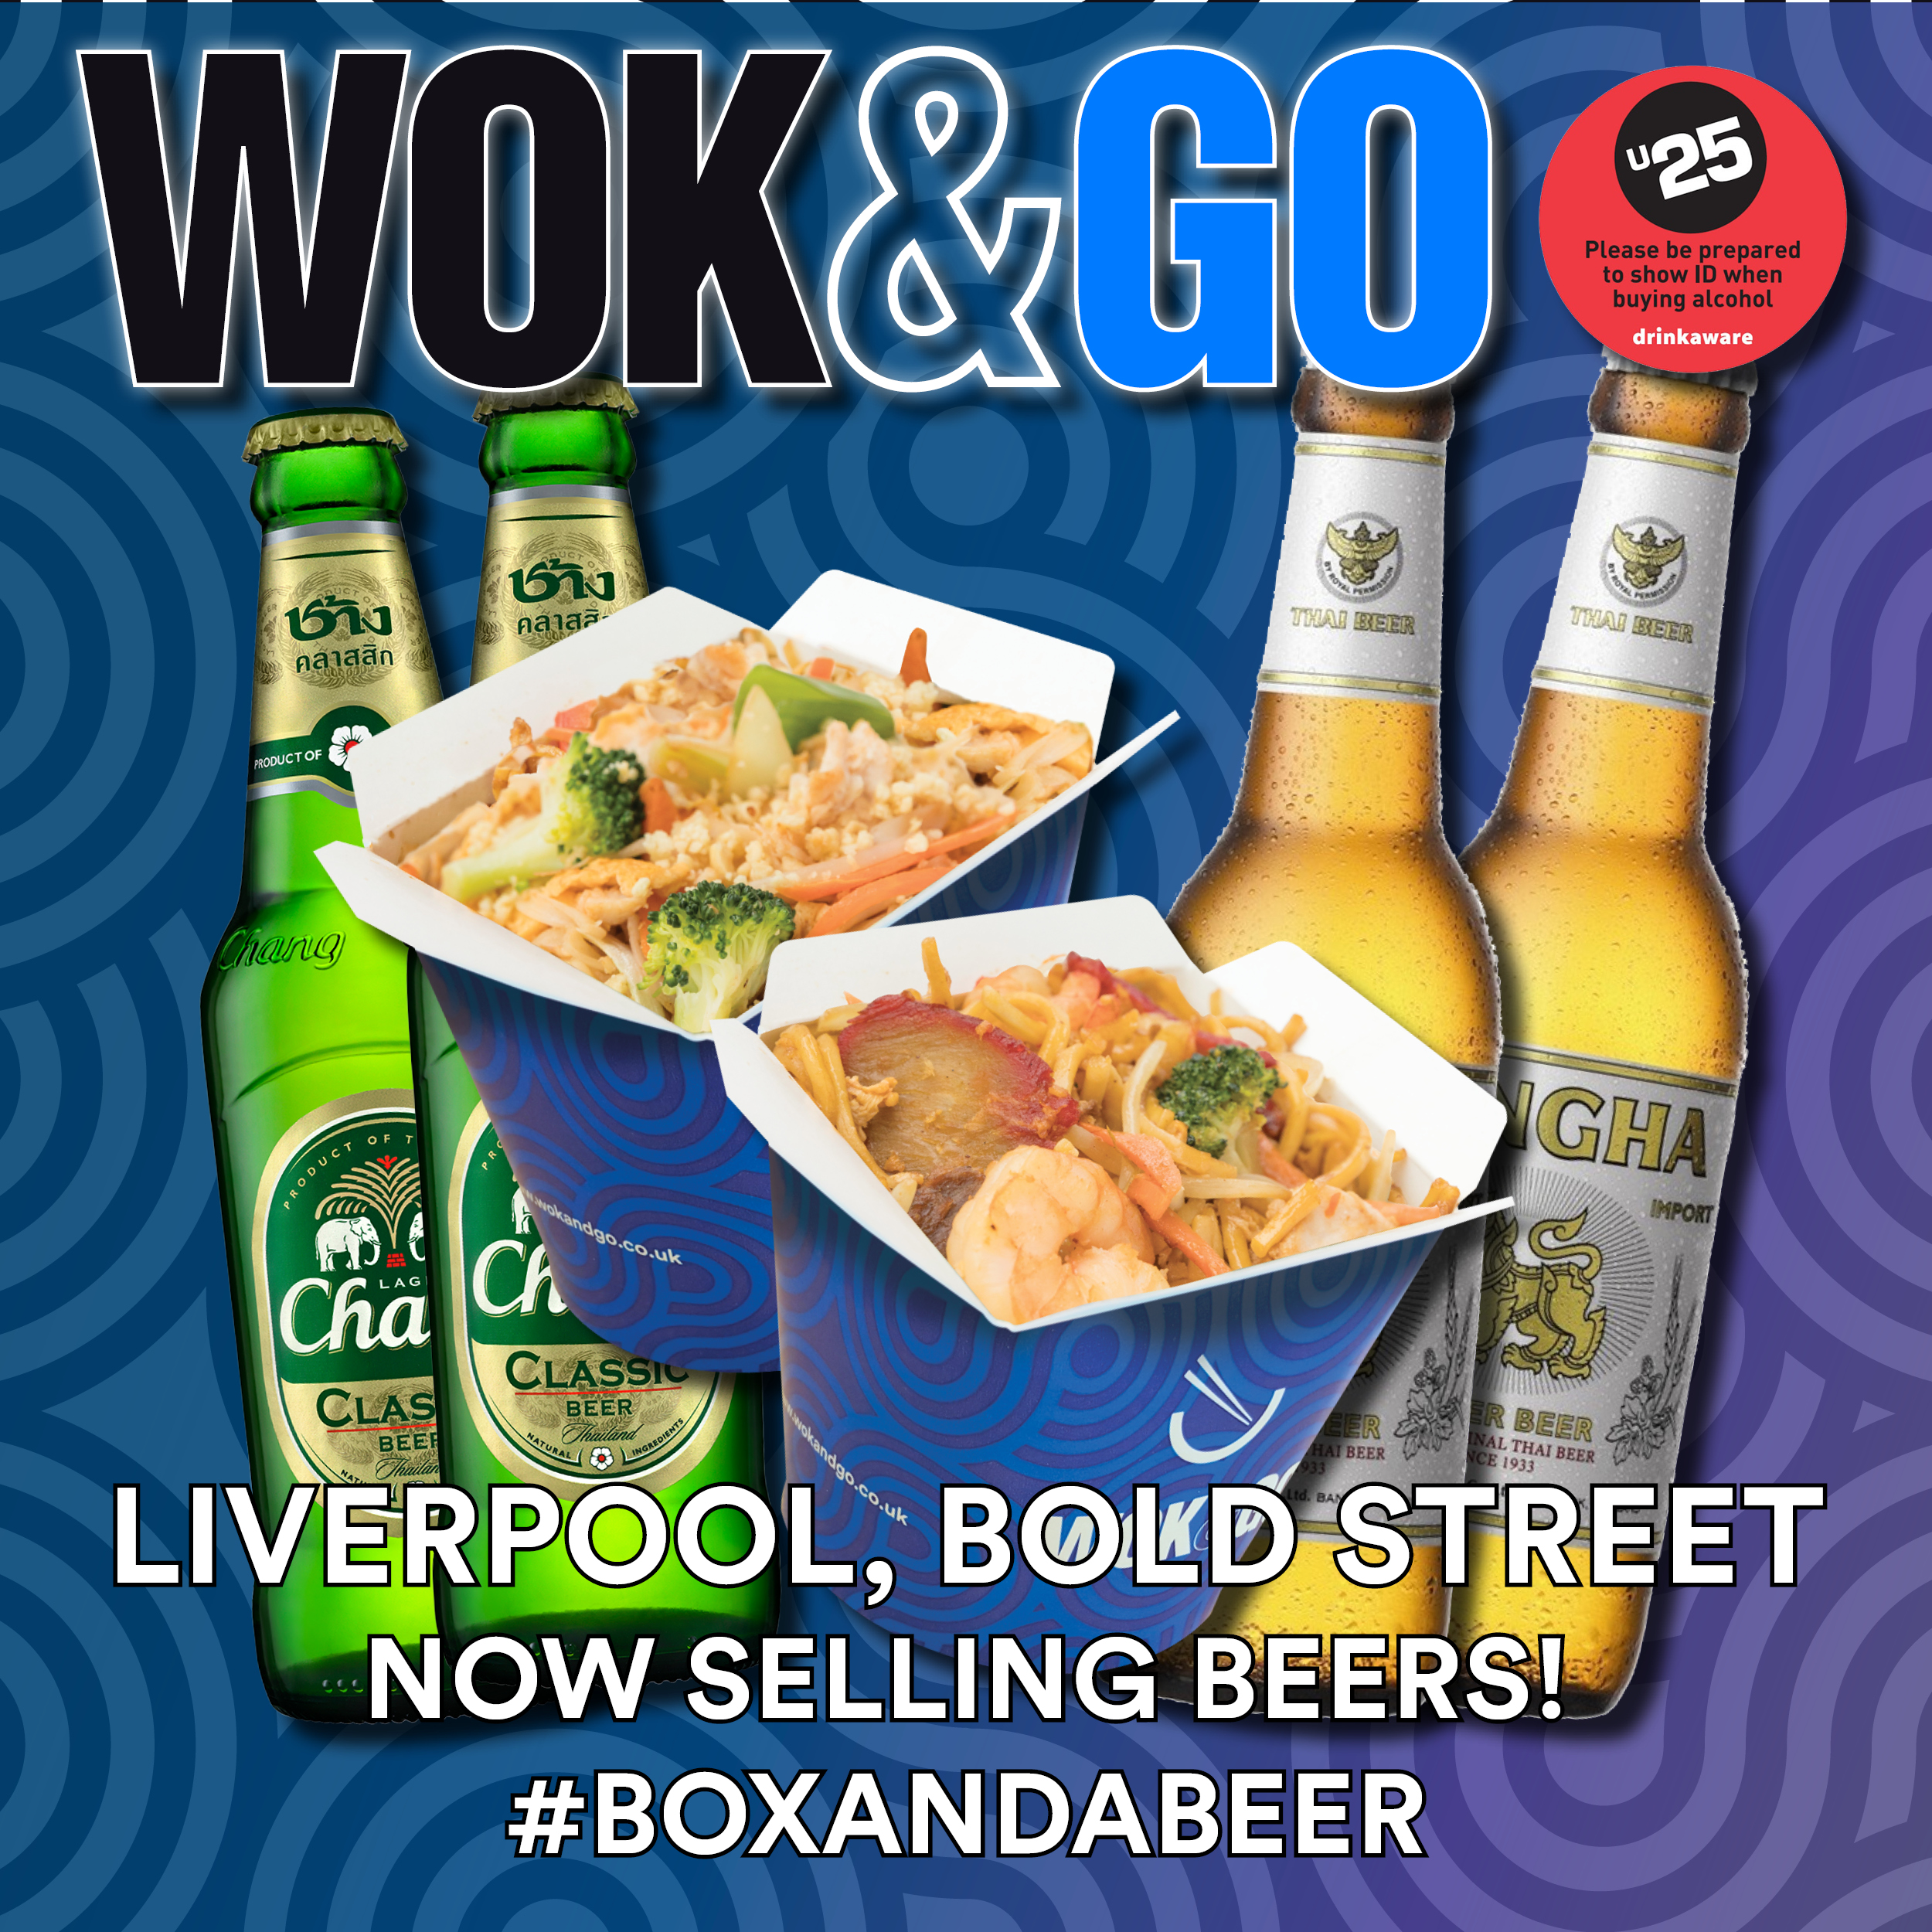 BoxAndABeer at Wok&Go Bold Street in Liverpool — Wok&Go